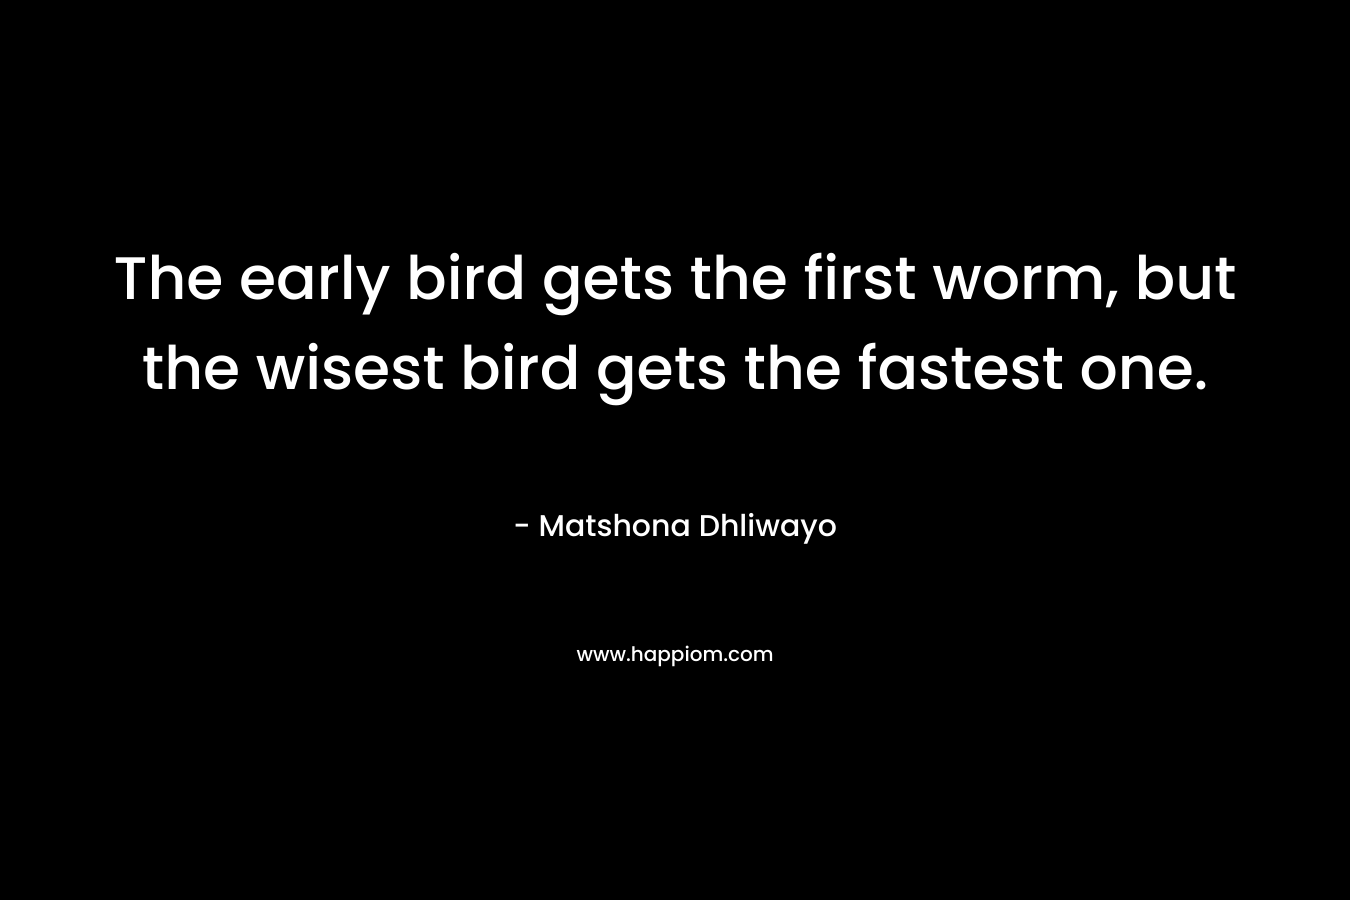 The early bird gets the first worm, but the wisest bird gets the fastest one.